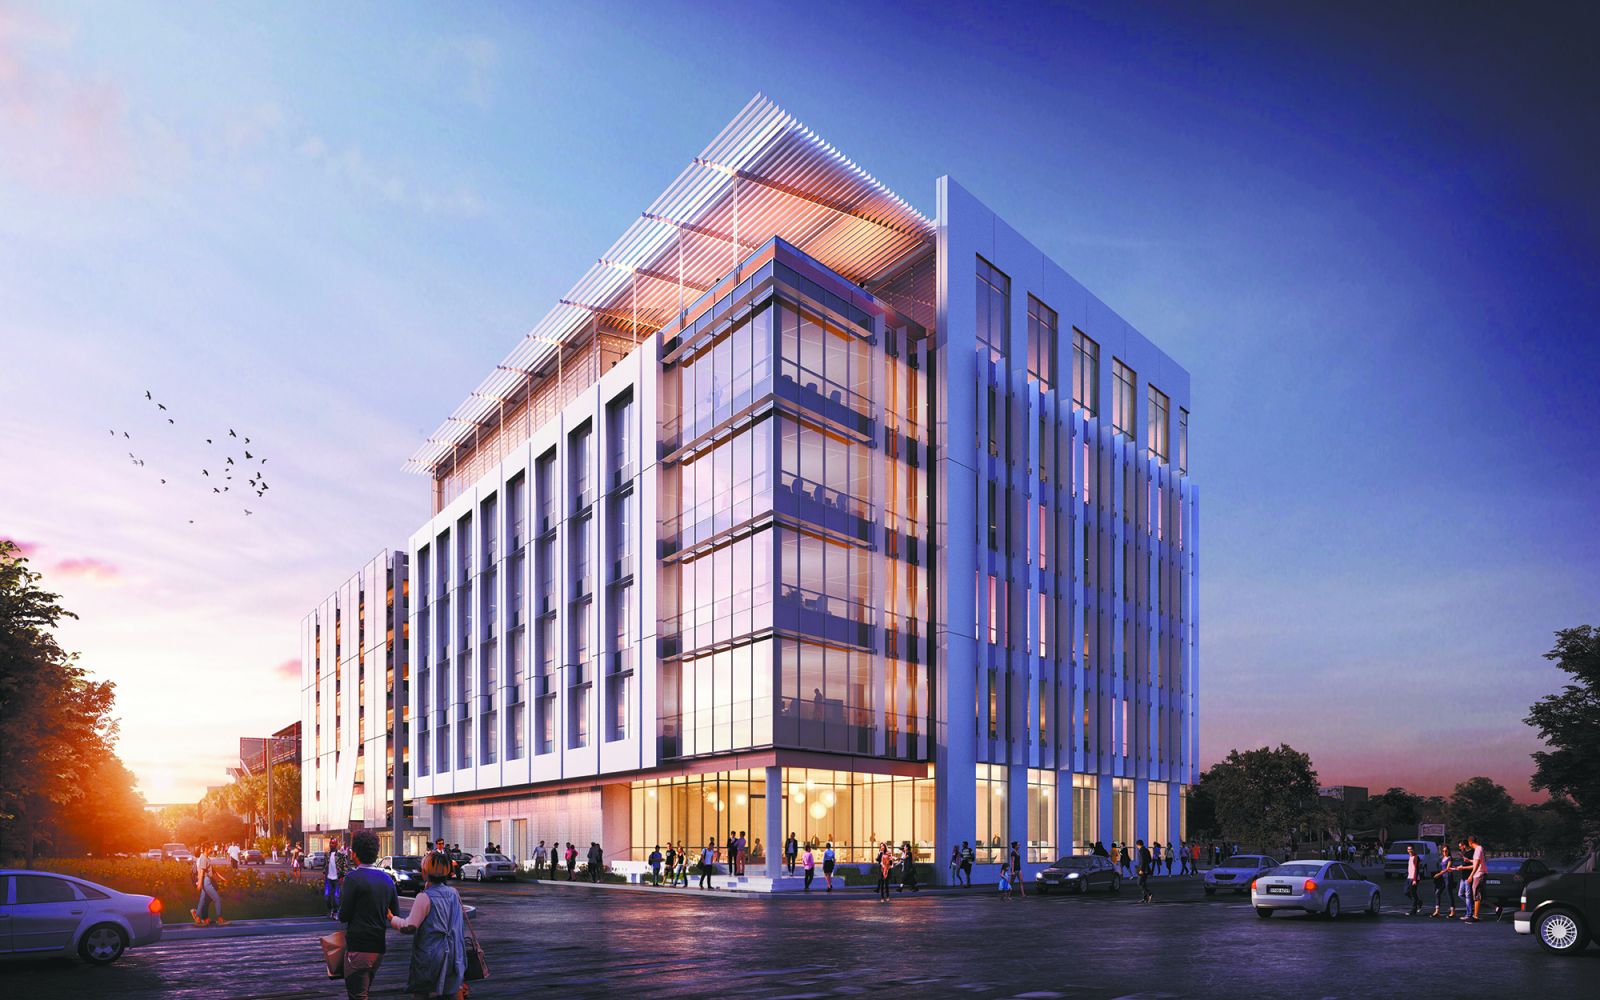 The Charleston Tech Center along Morrison Drive will eventually include space for startups and larger, established tech firms. (Rendering/Provided)